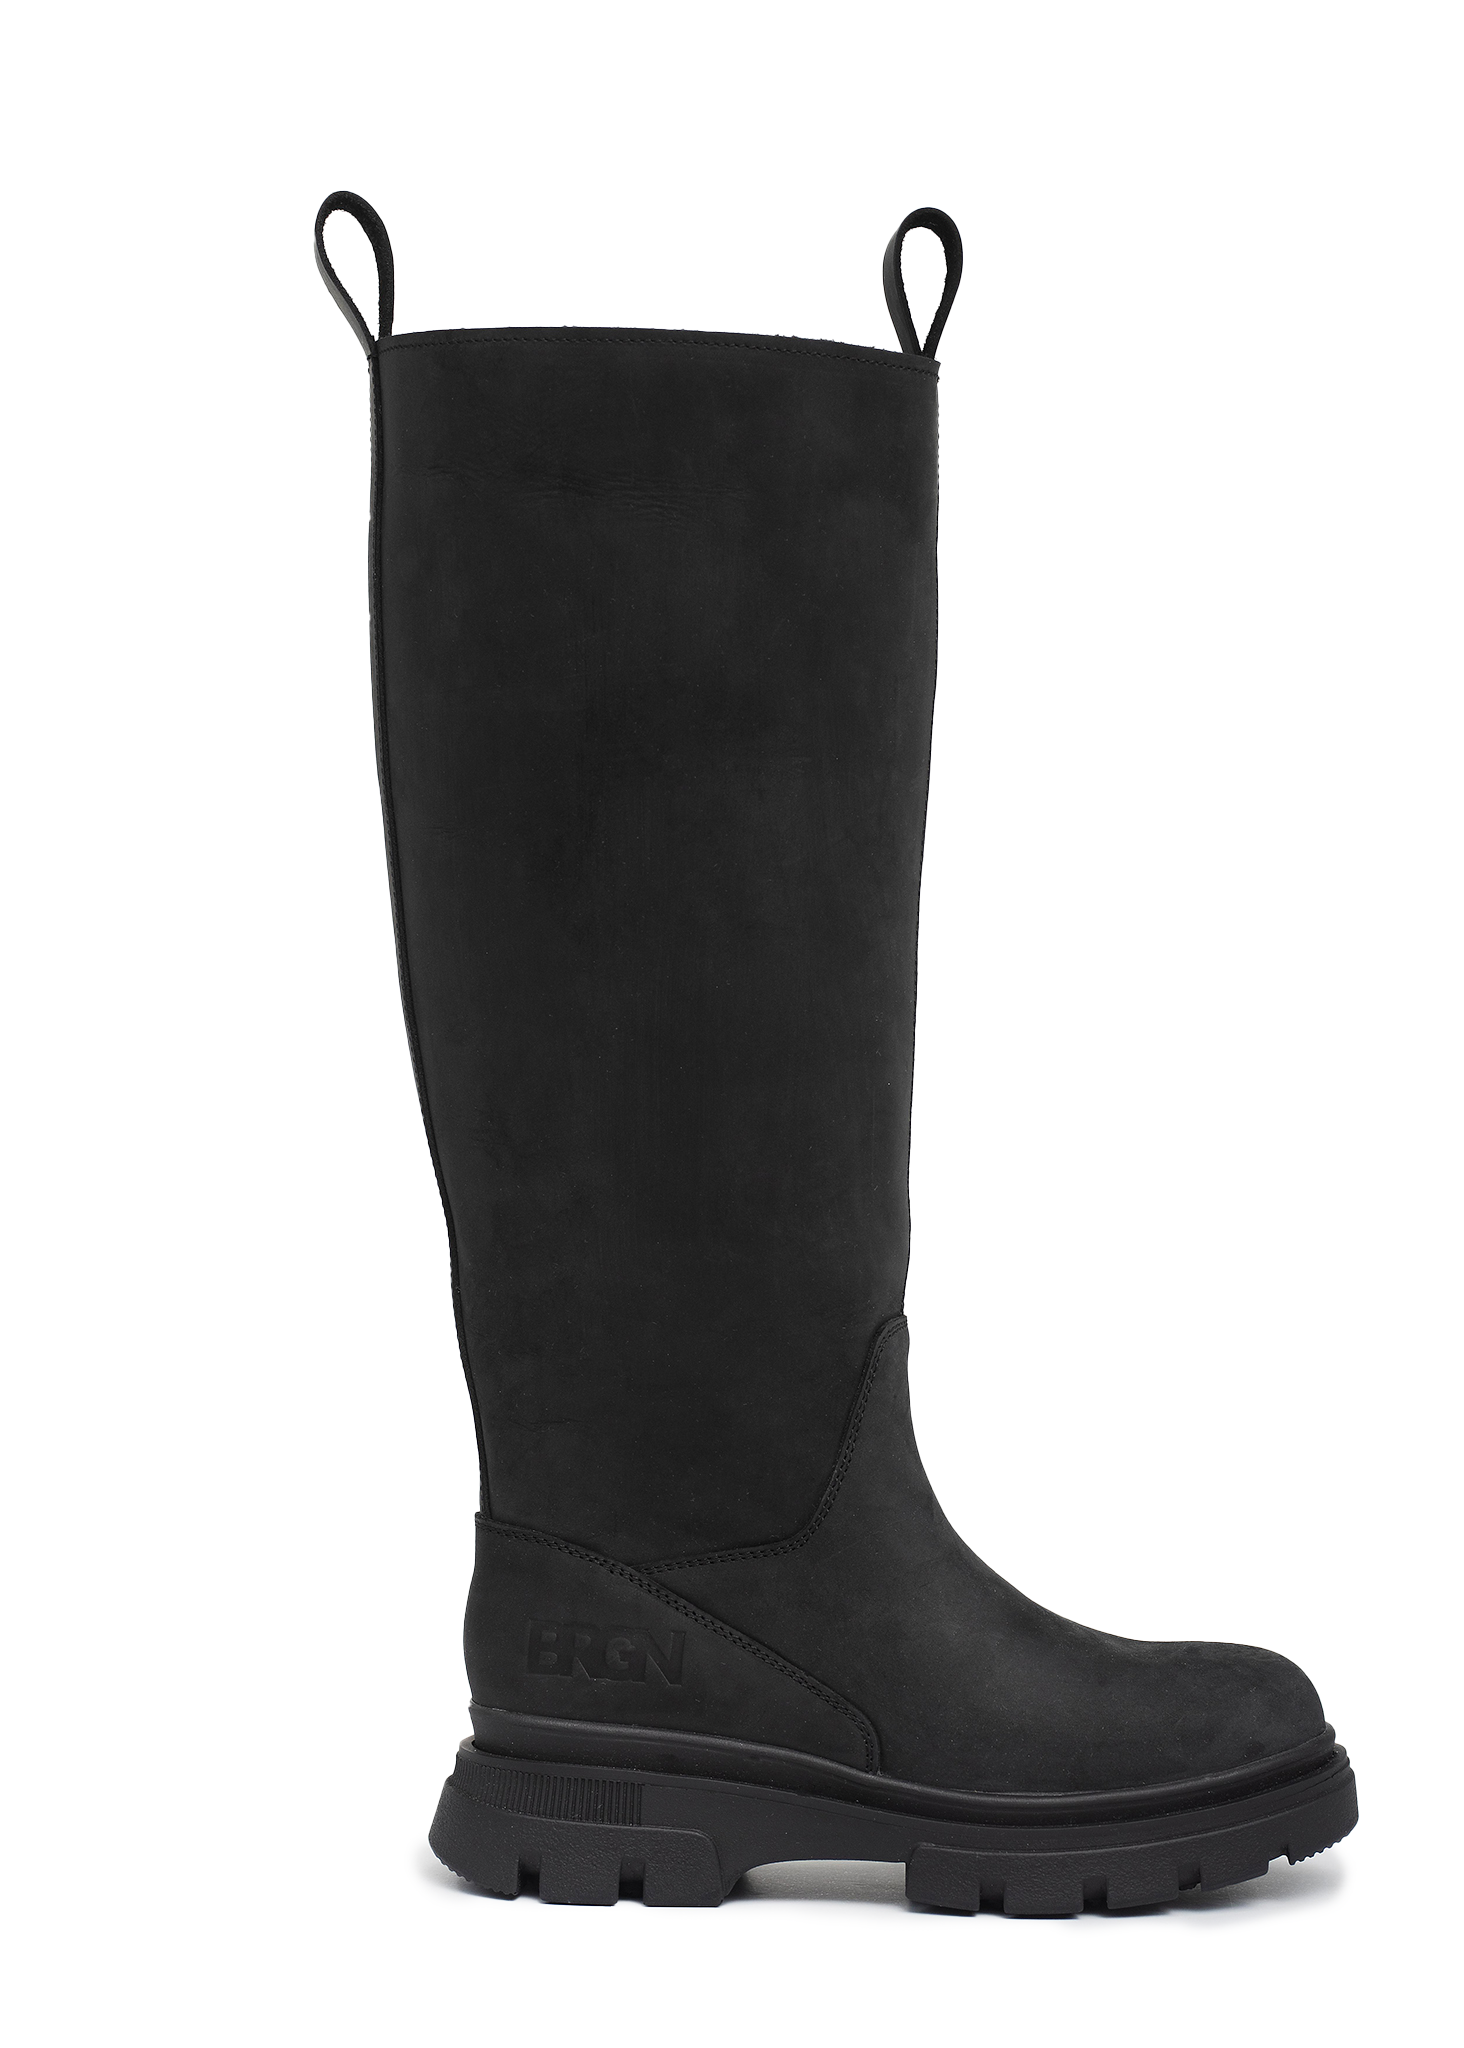 BRGN High Leather Boots Shoes 095 New Black